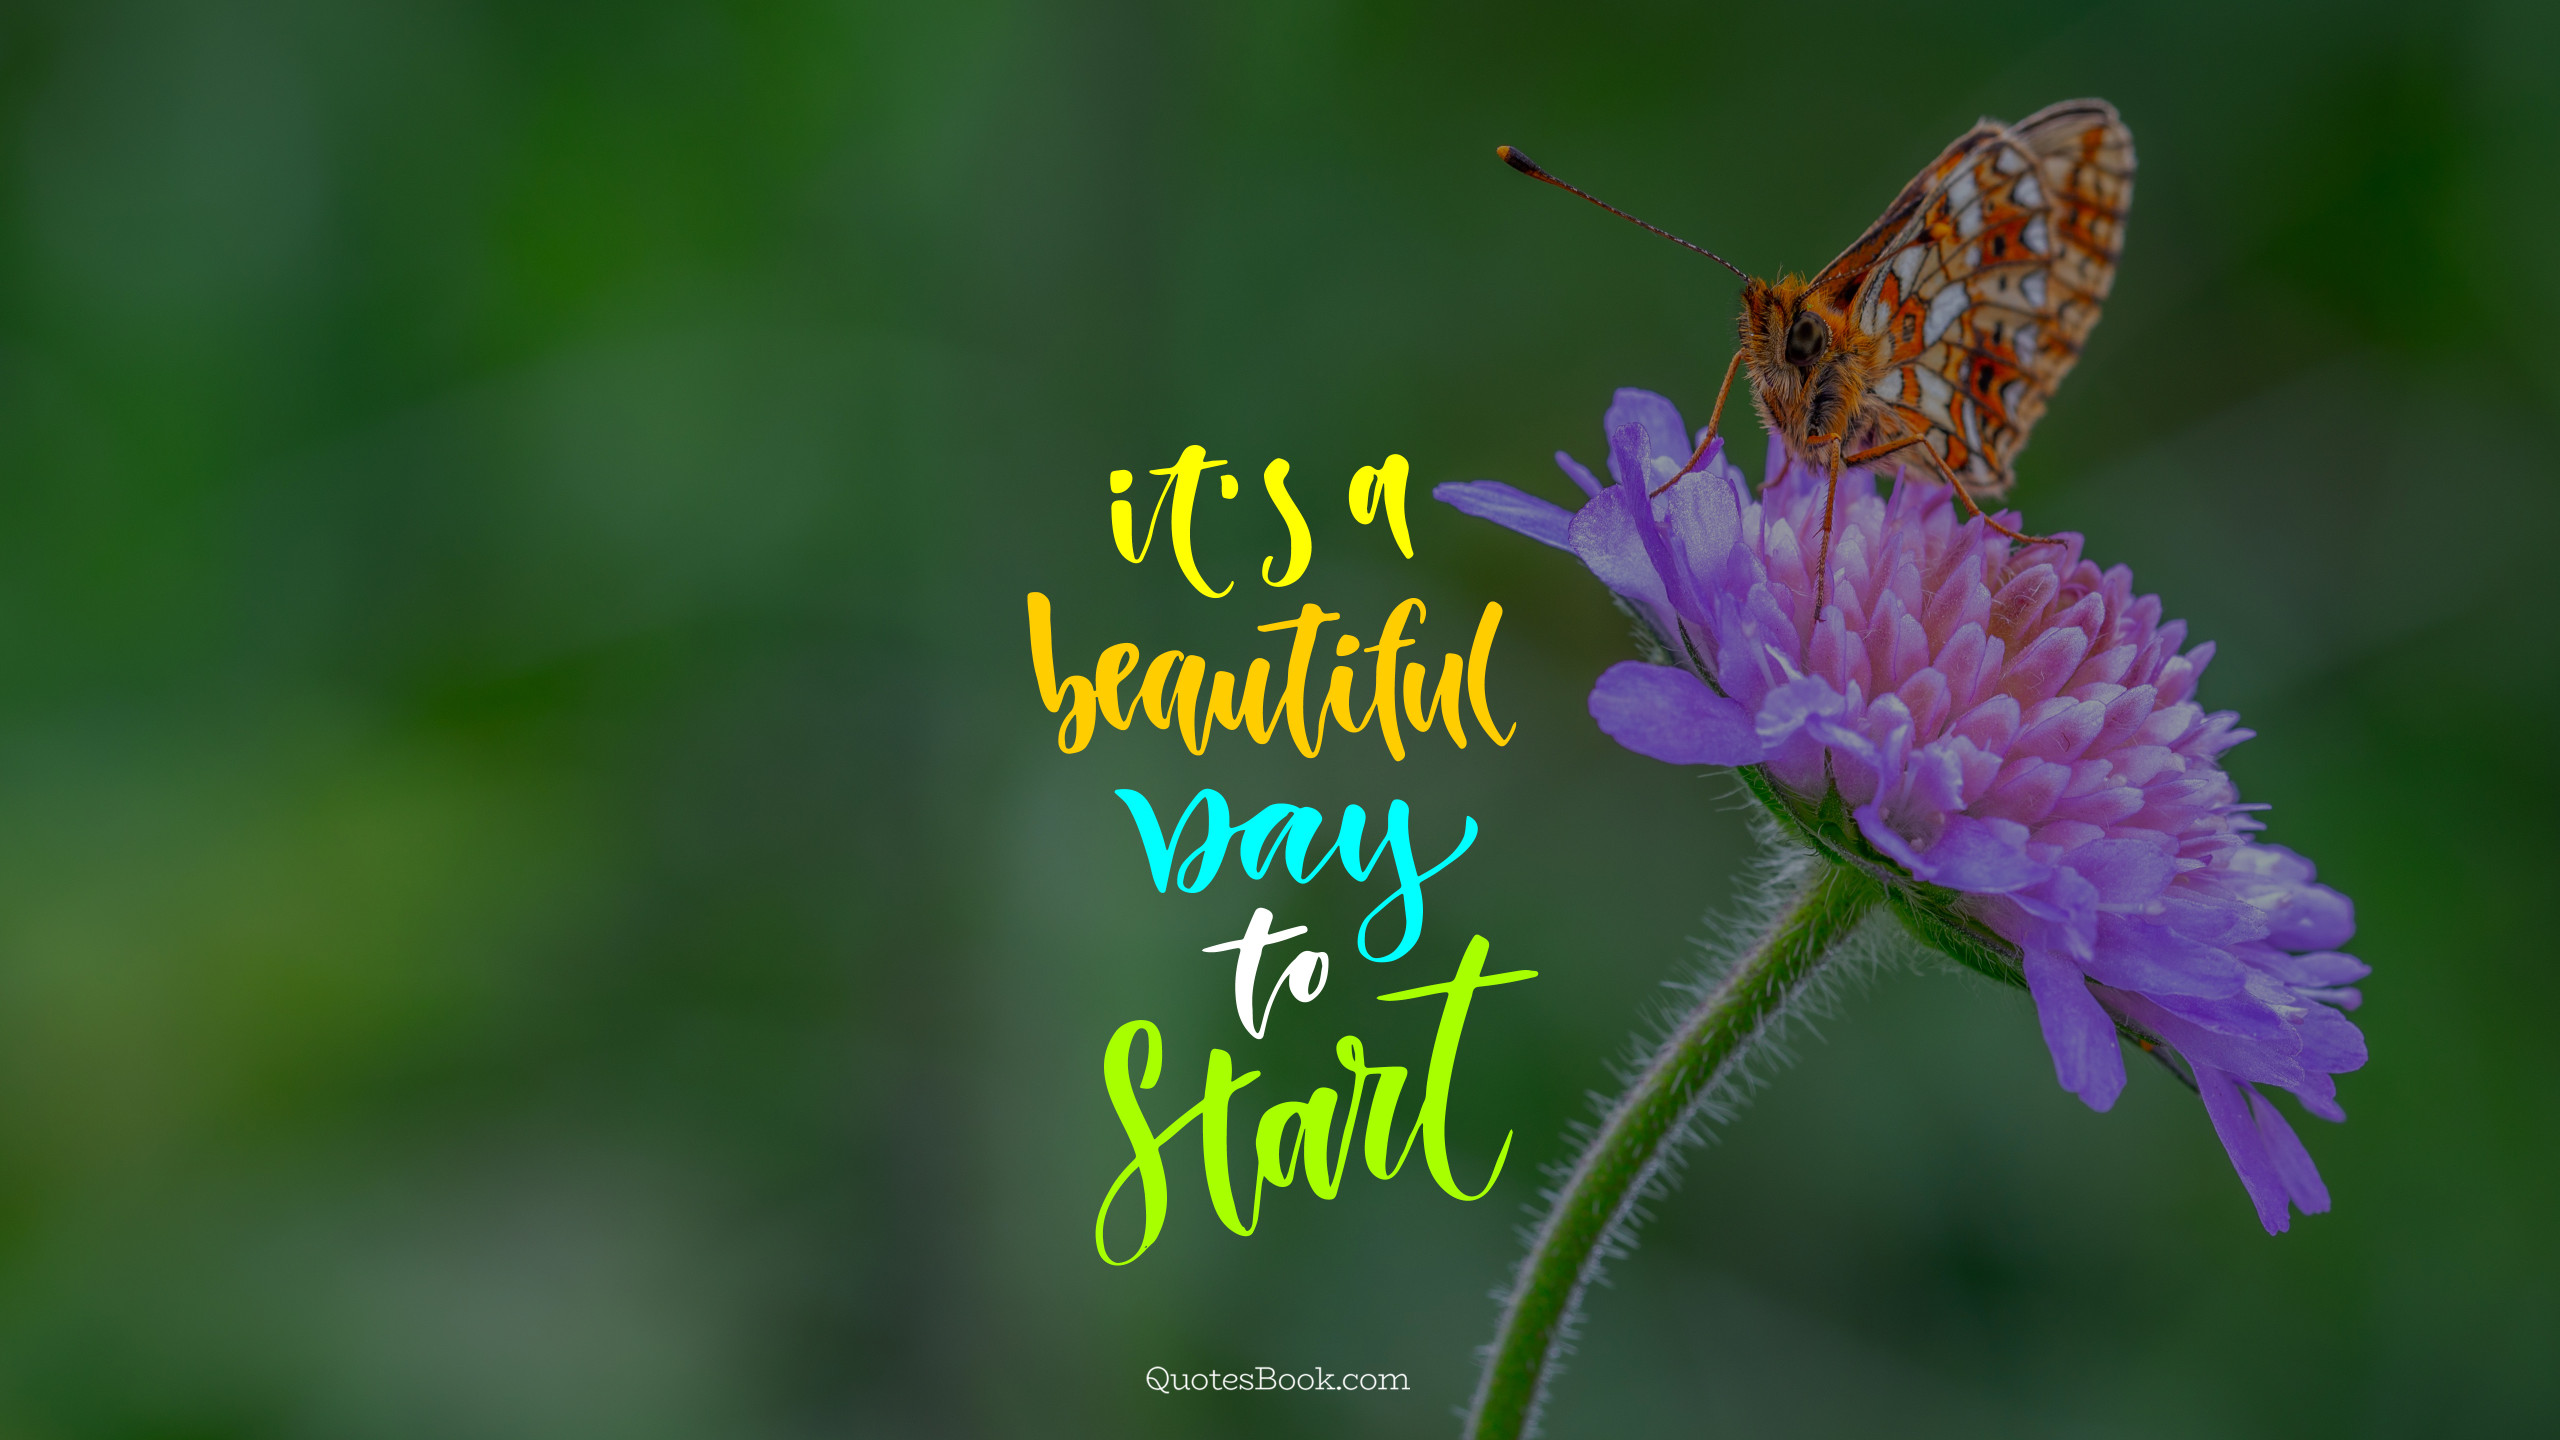 It's a beautiful day to start - QuotesBook